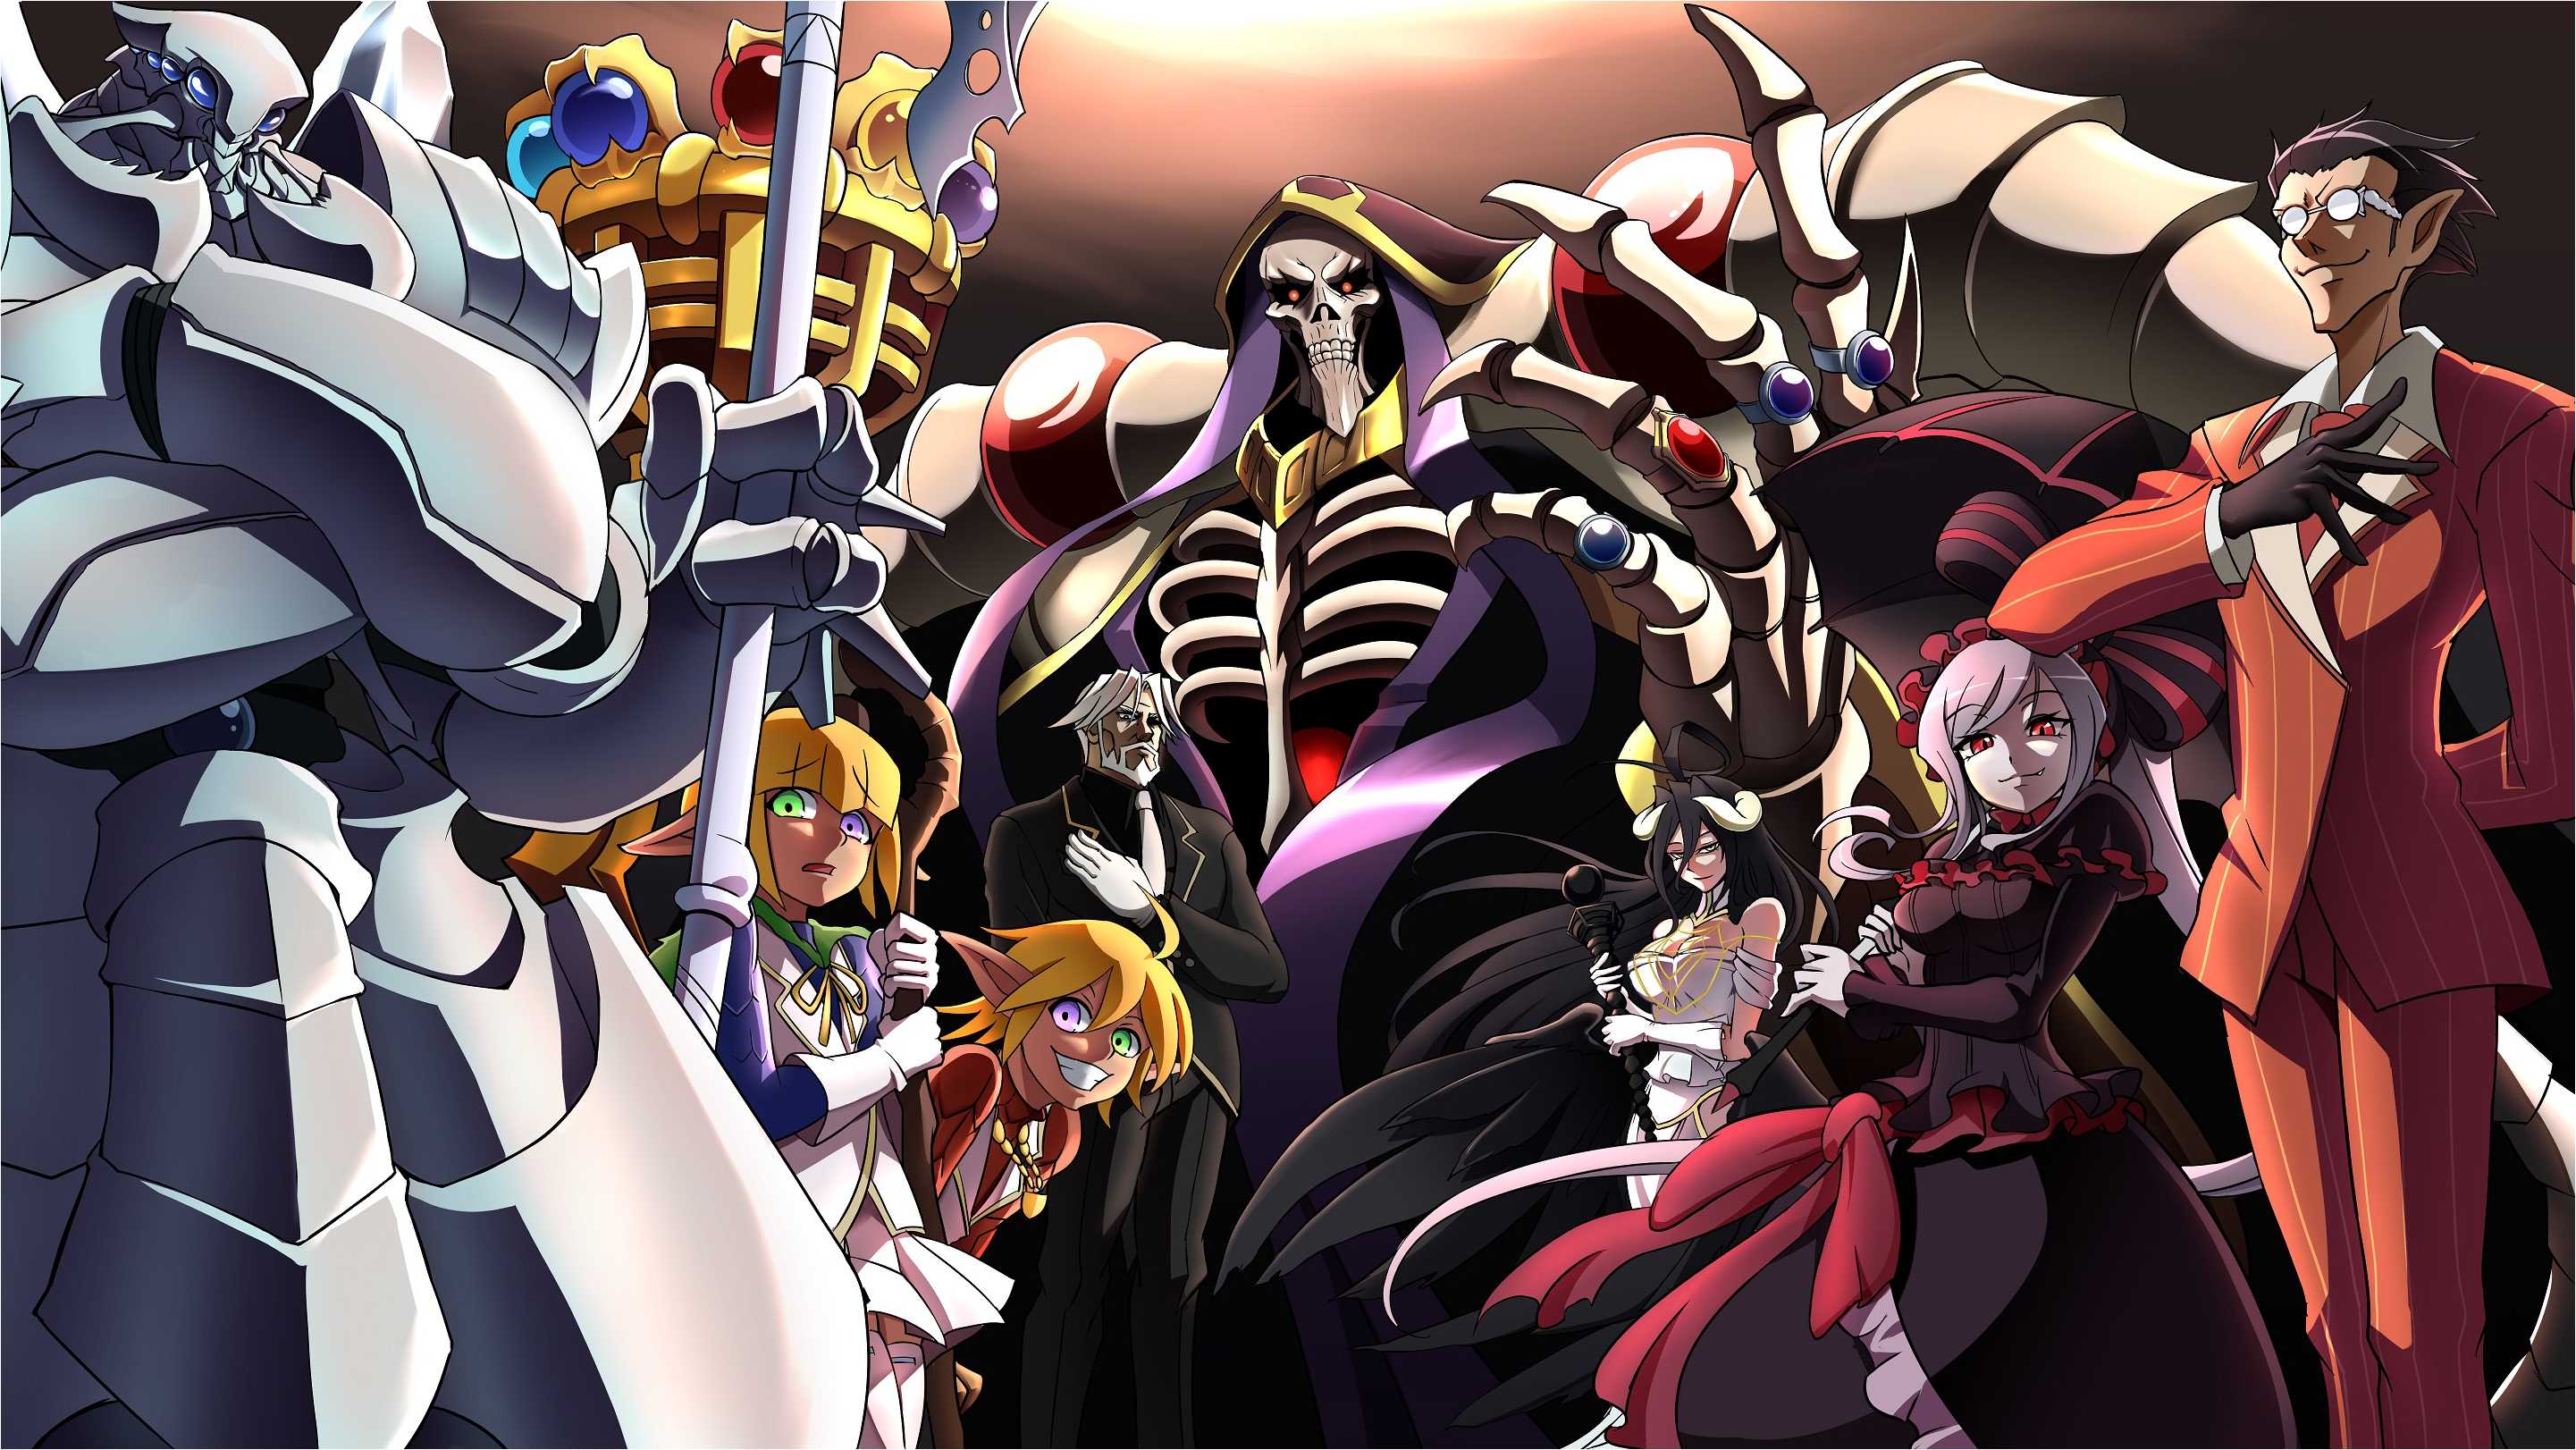 Anime Overlord Hd Wallpapers - Wallpaper Cave